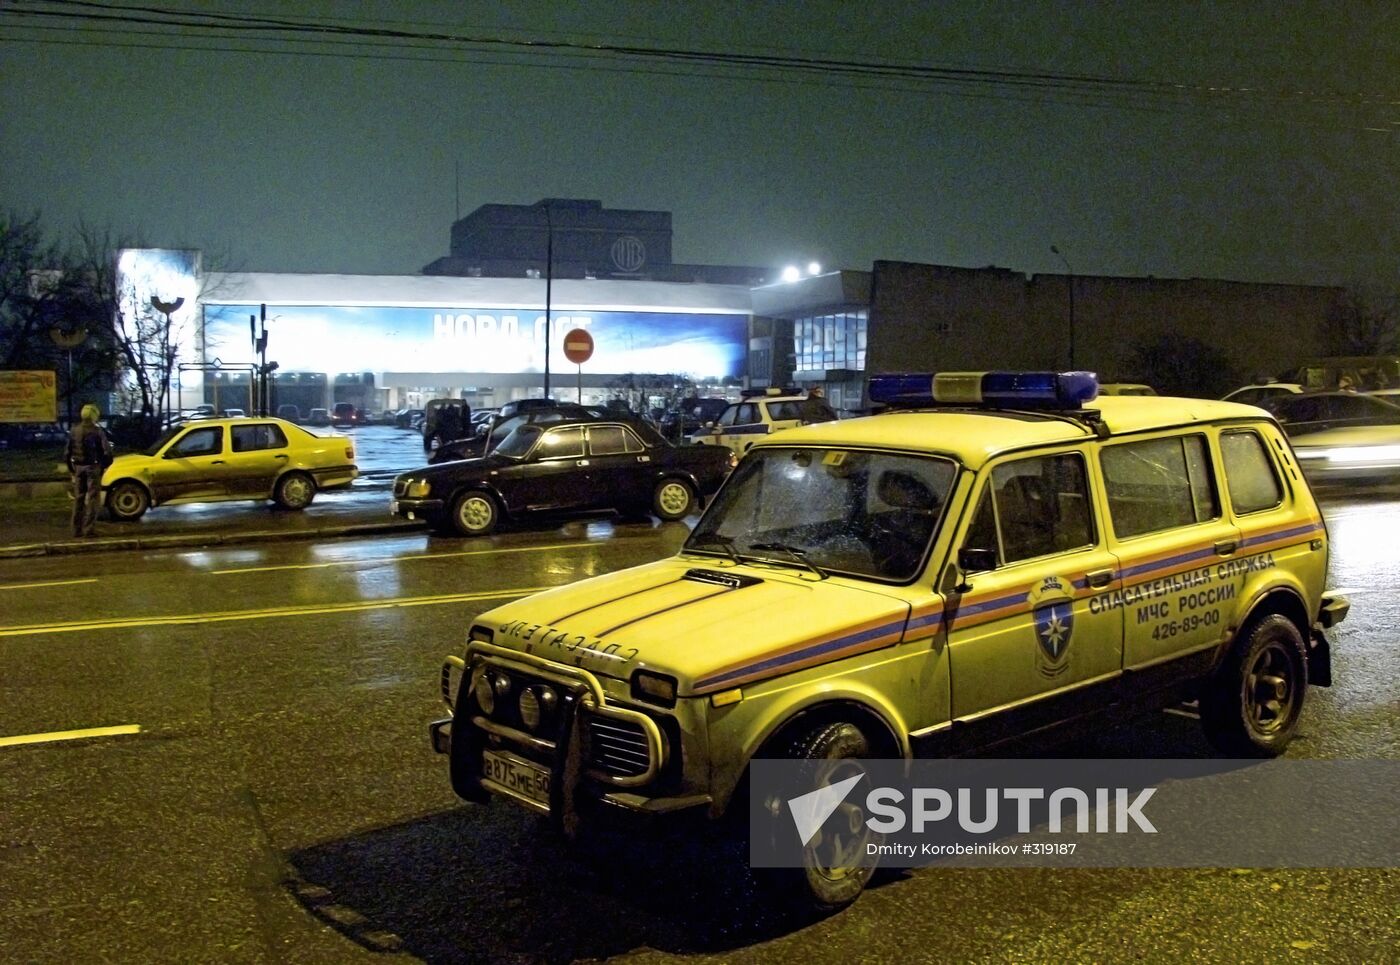 Seizure by terrorists of the Dubrovka Theatrical Center